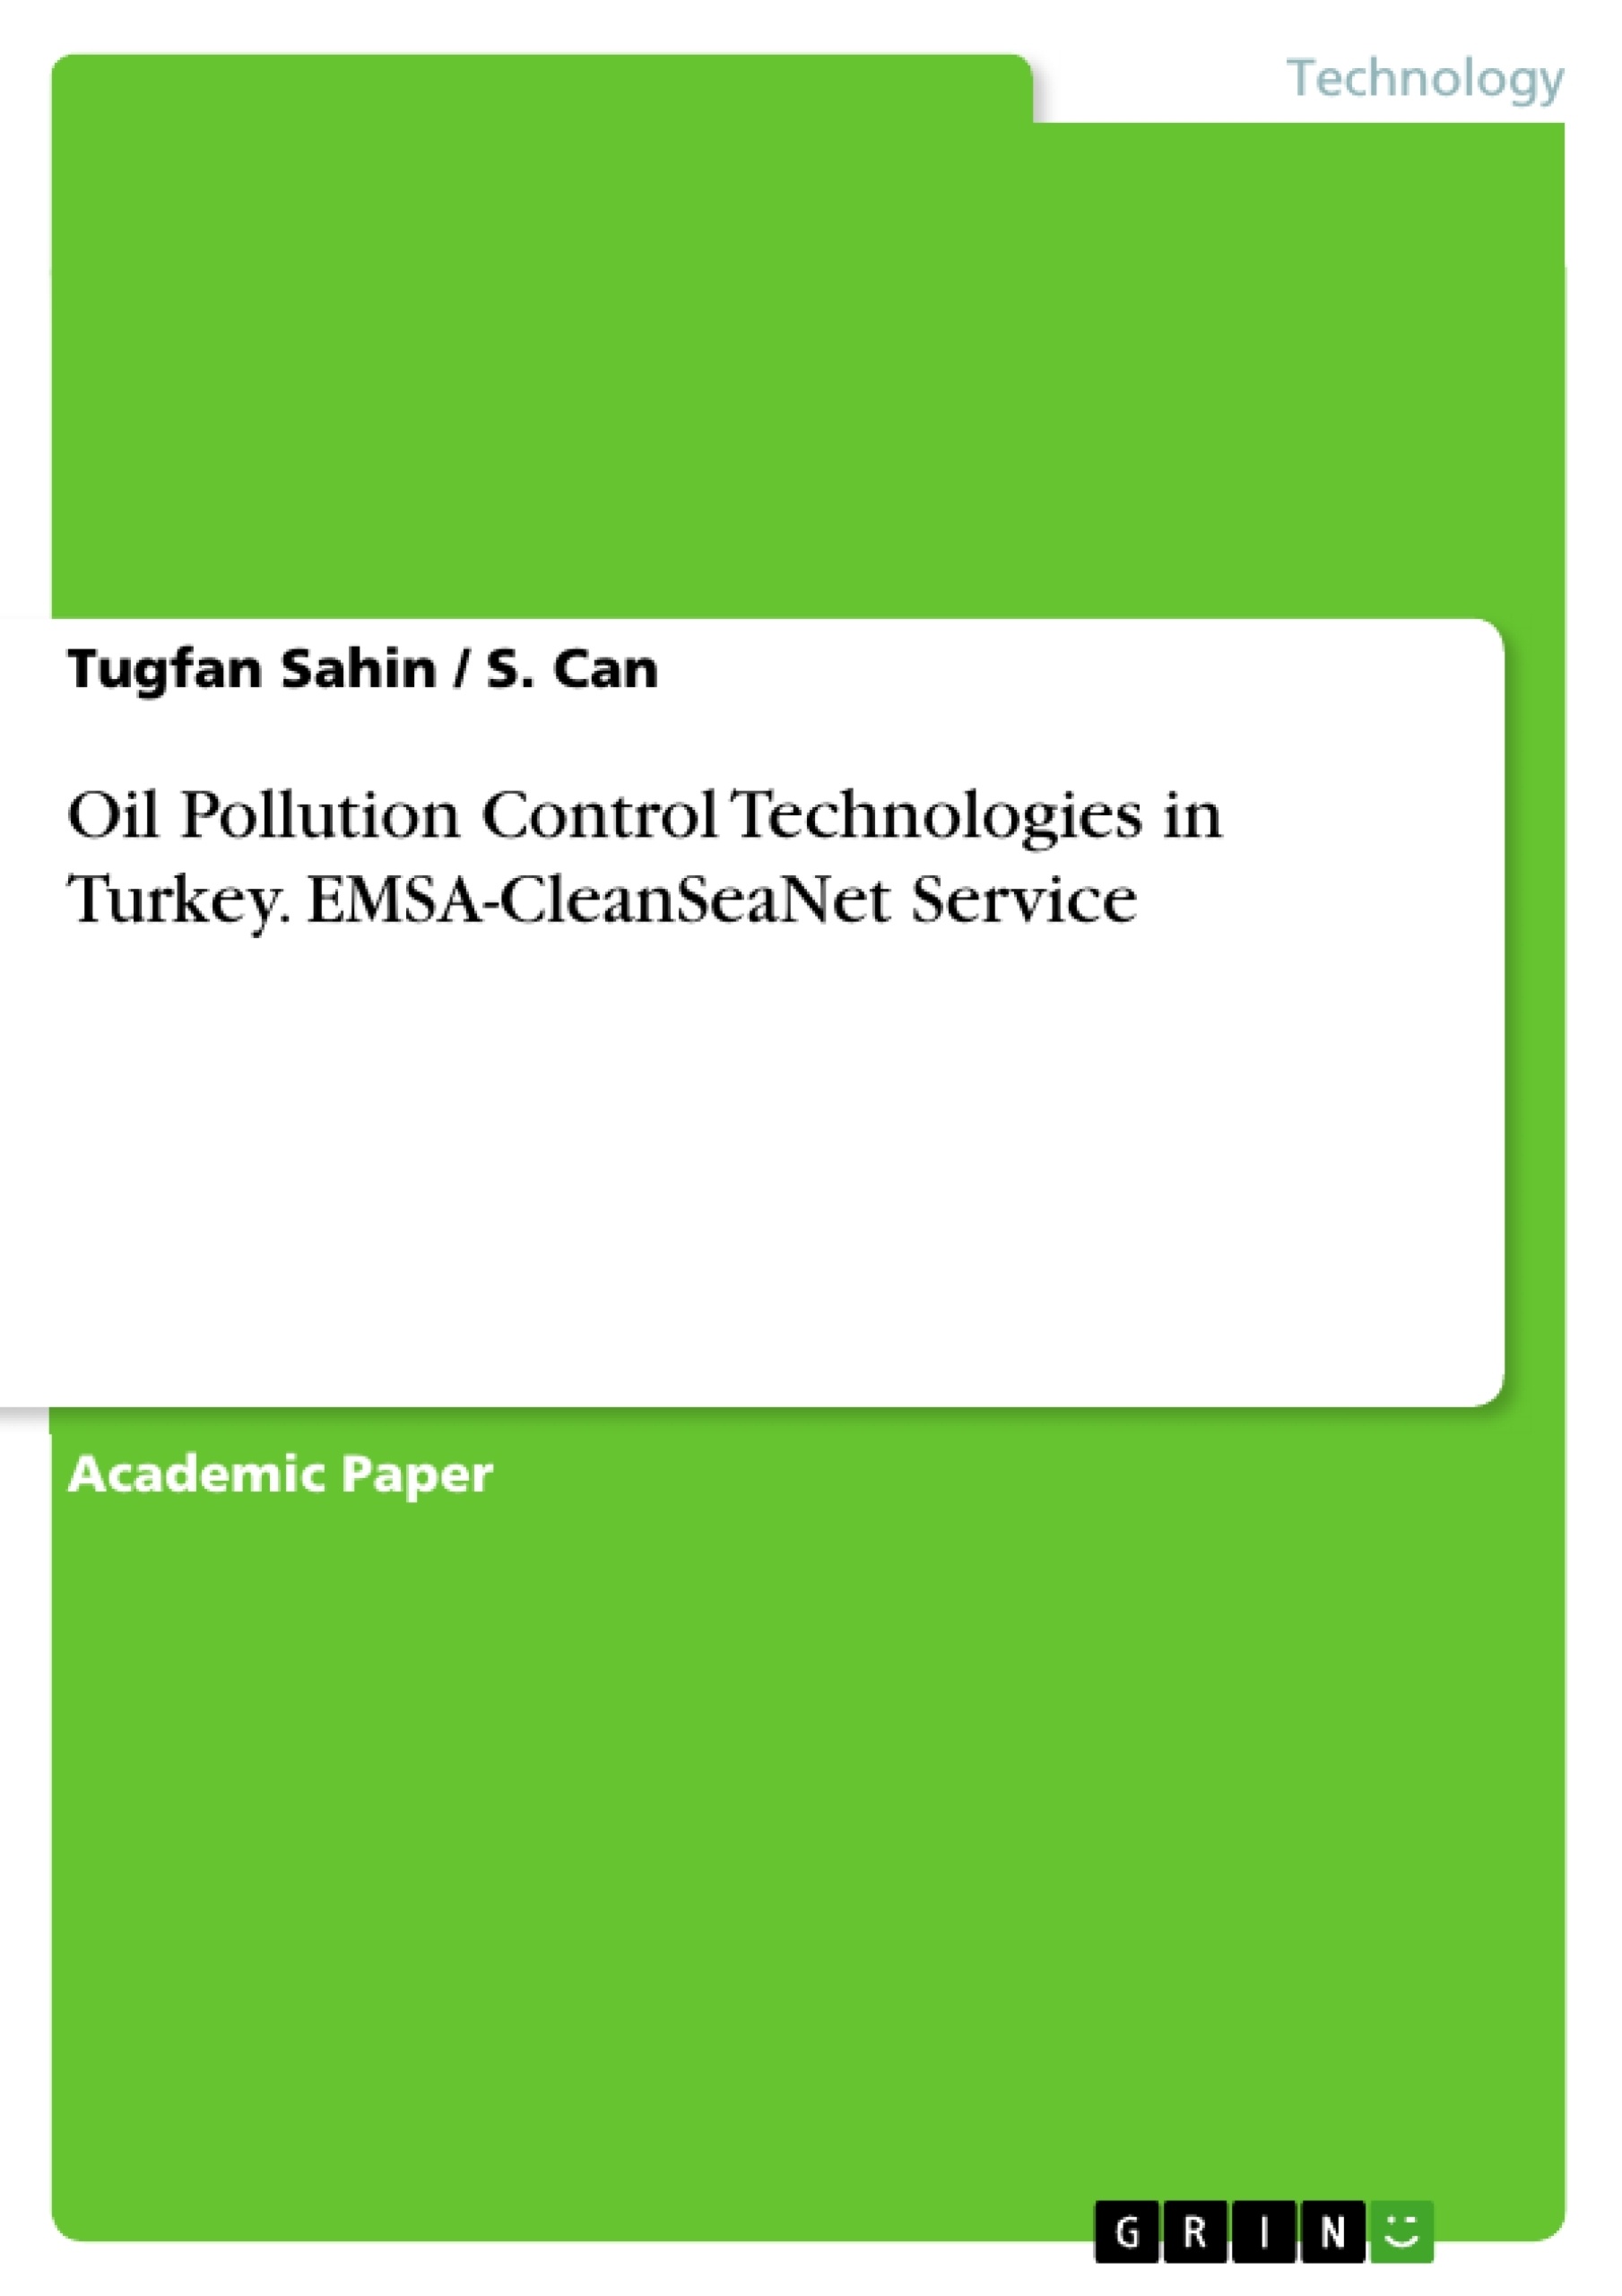 Título: Oil Pollution Control Technologies in Turkey. EMSA-CleanSeaNet Service